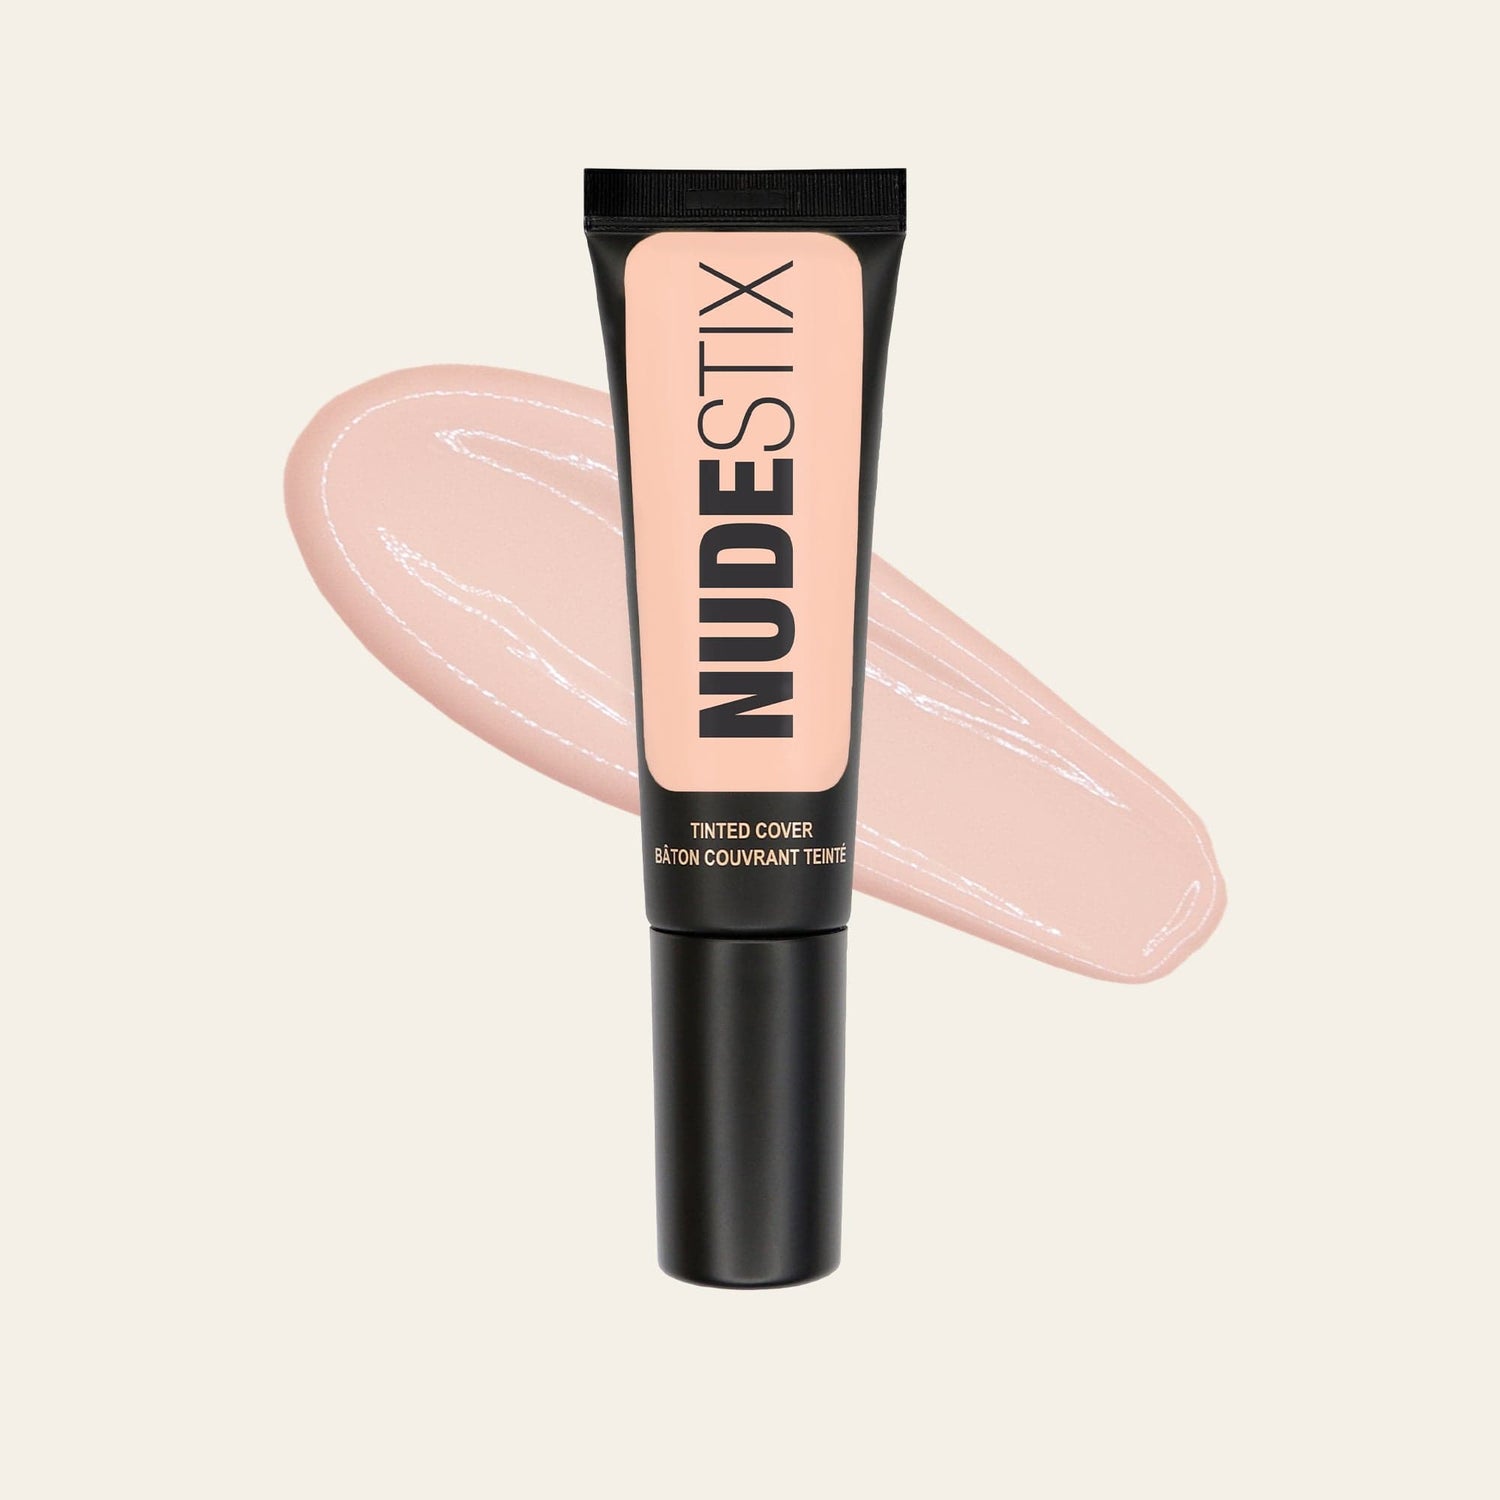 Tinted Cover Liquid Foundation in shade Nude 1.5